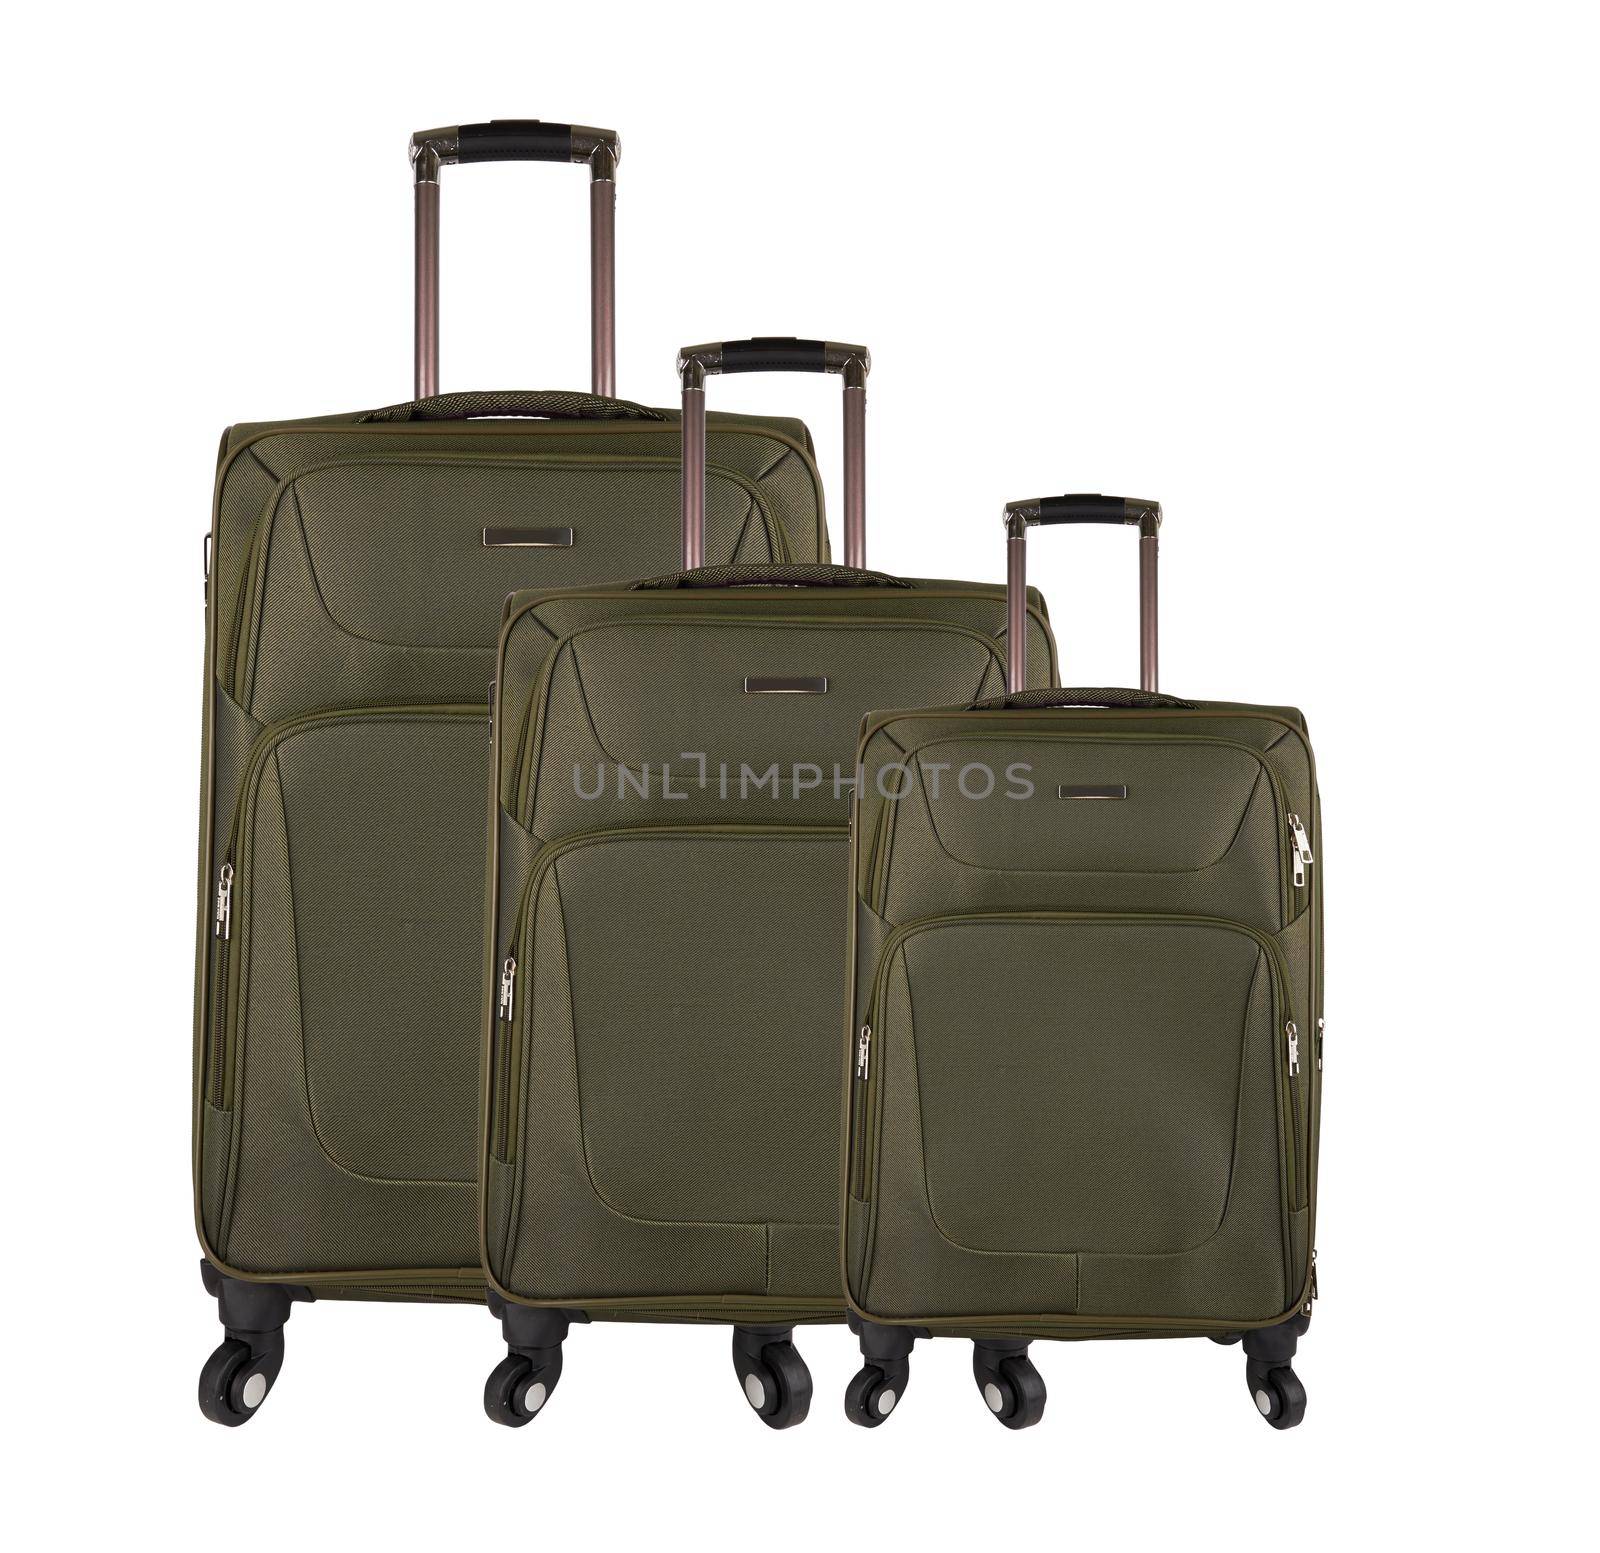 Green suitcase isolated on a white background